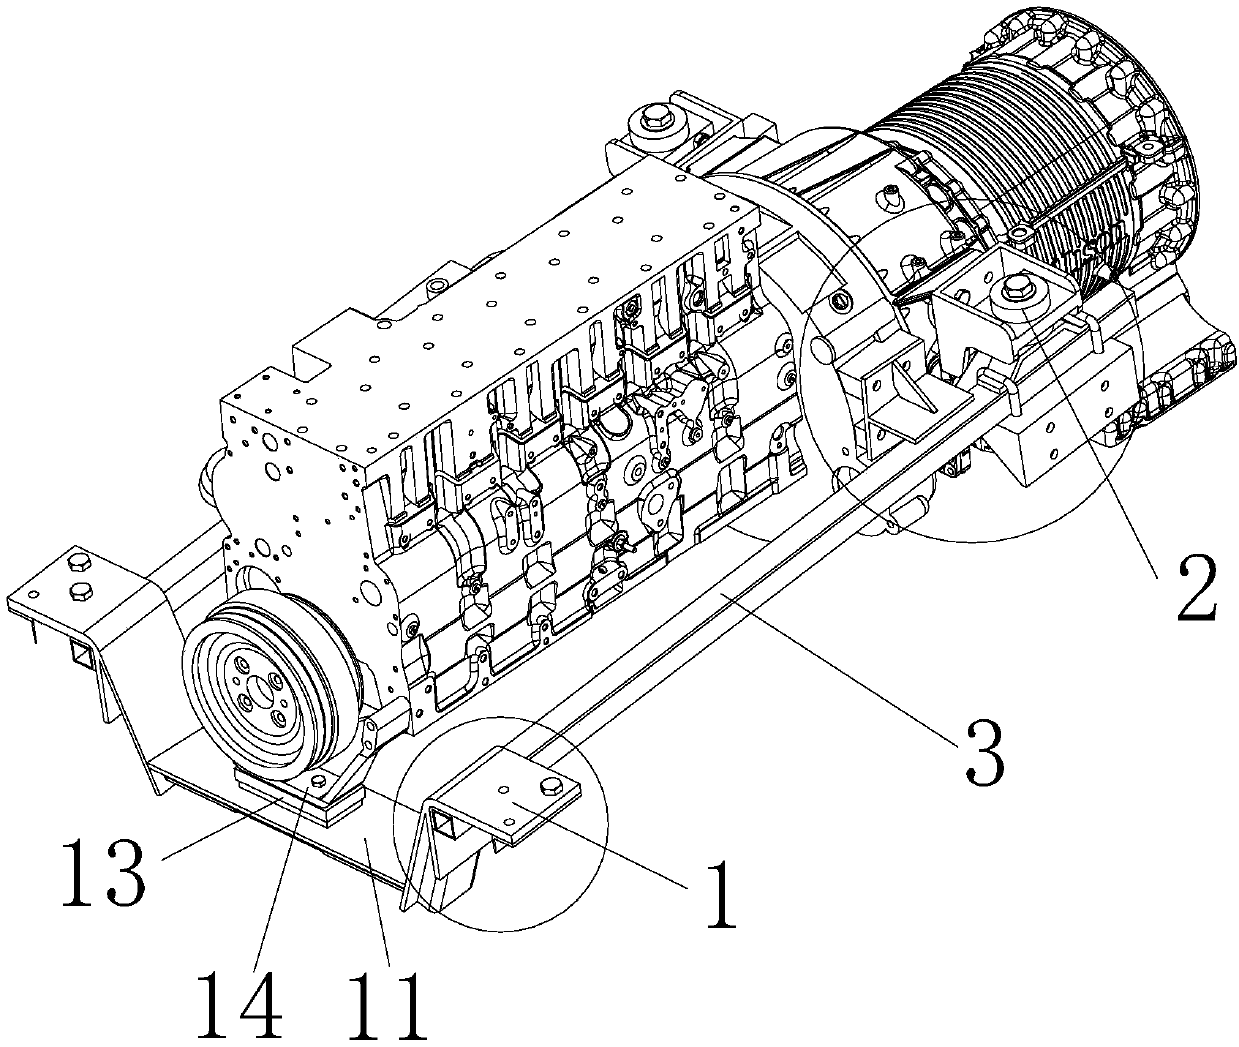 Engine drawing device convenient to overhaul